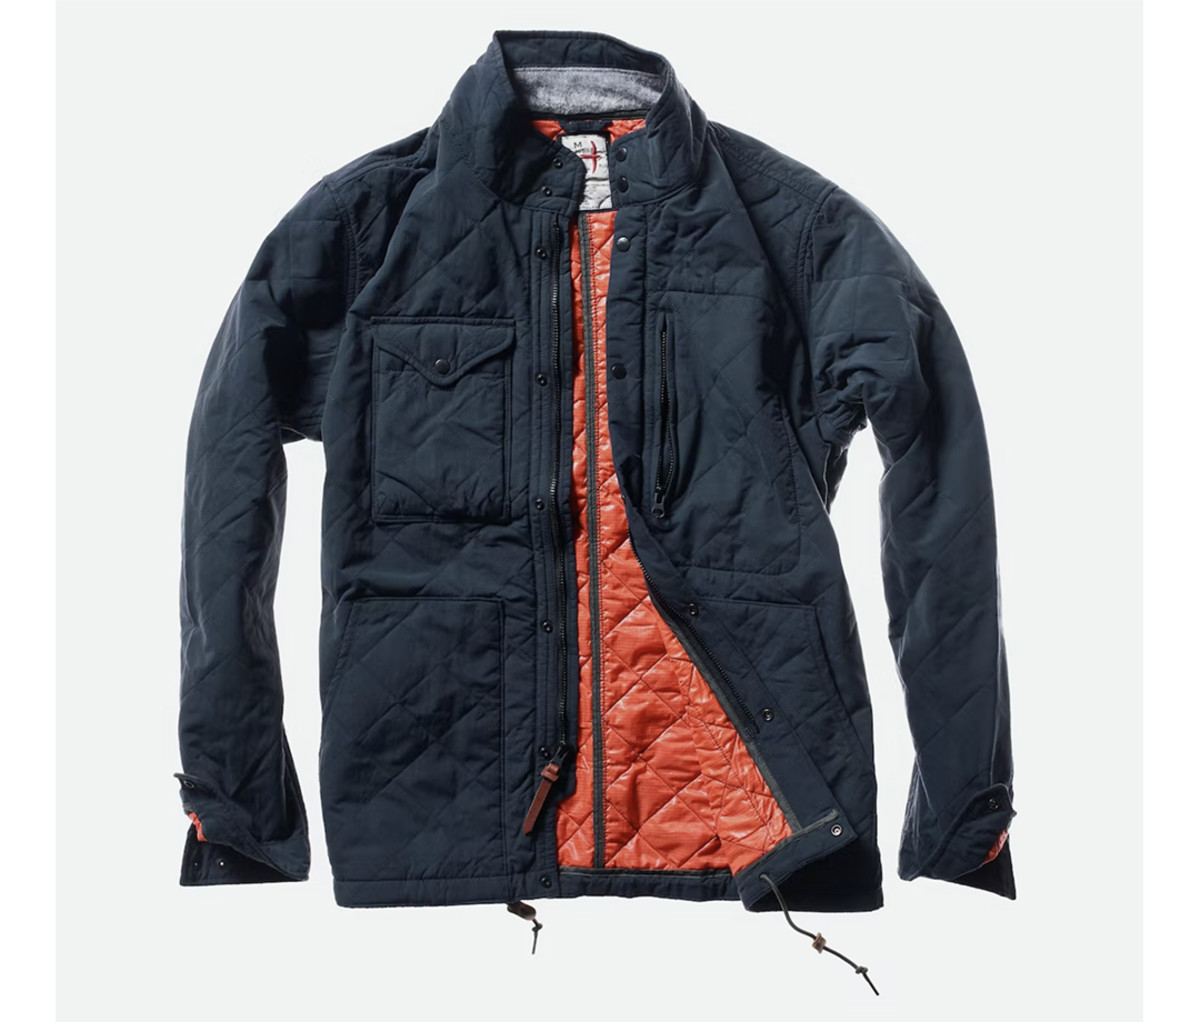 Cyber Monday Makes This Relwen Quilted Tanker Jacket Even Easier to Buy ...